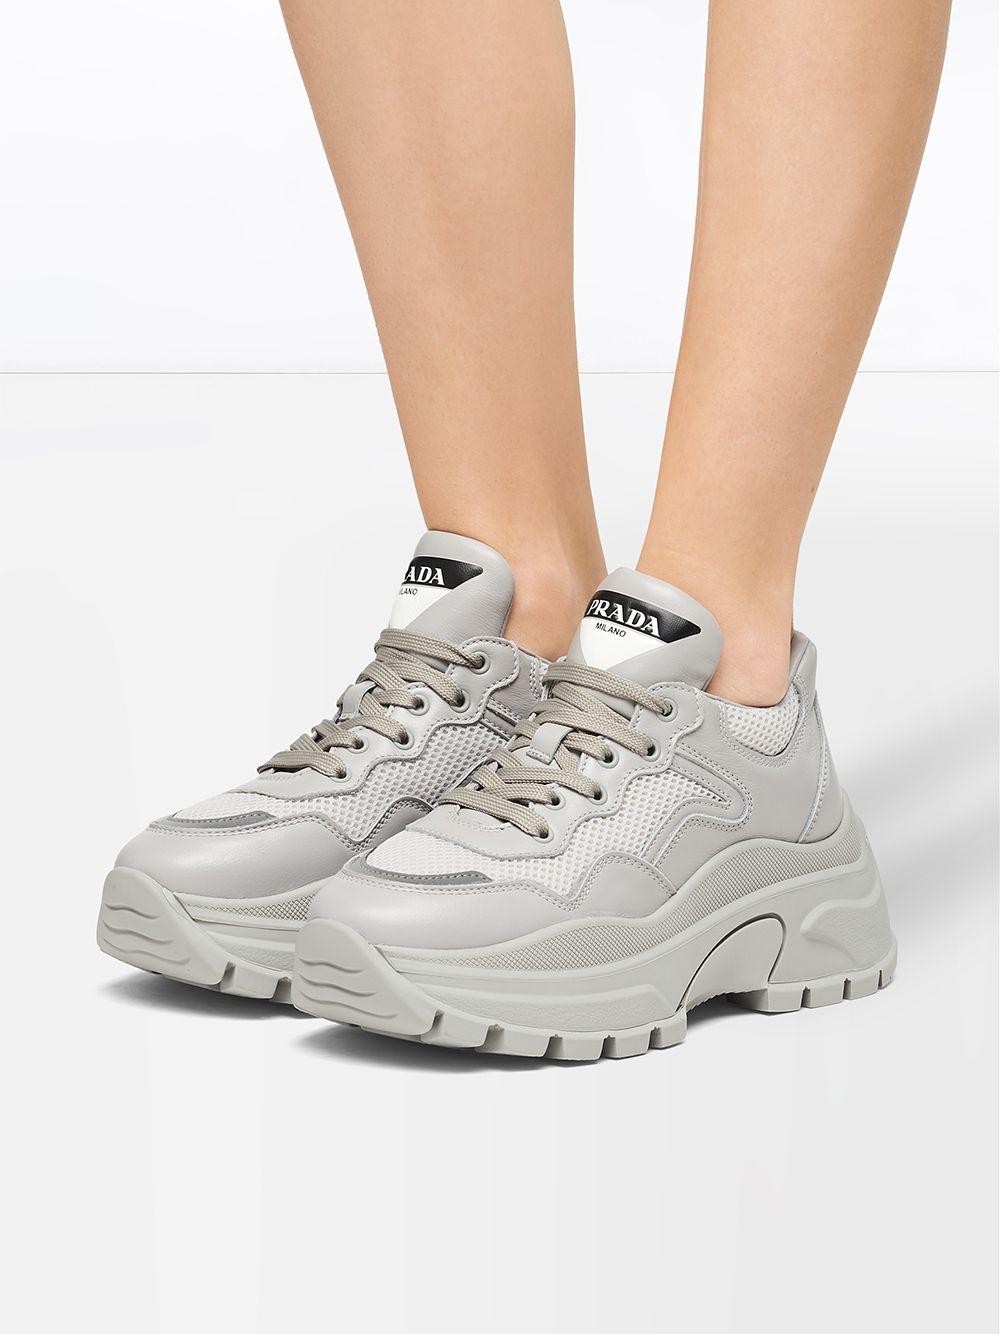 Prada Leather Chunky Panelled Sneakers in Grey (Gray) - Lyst